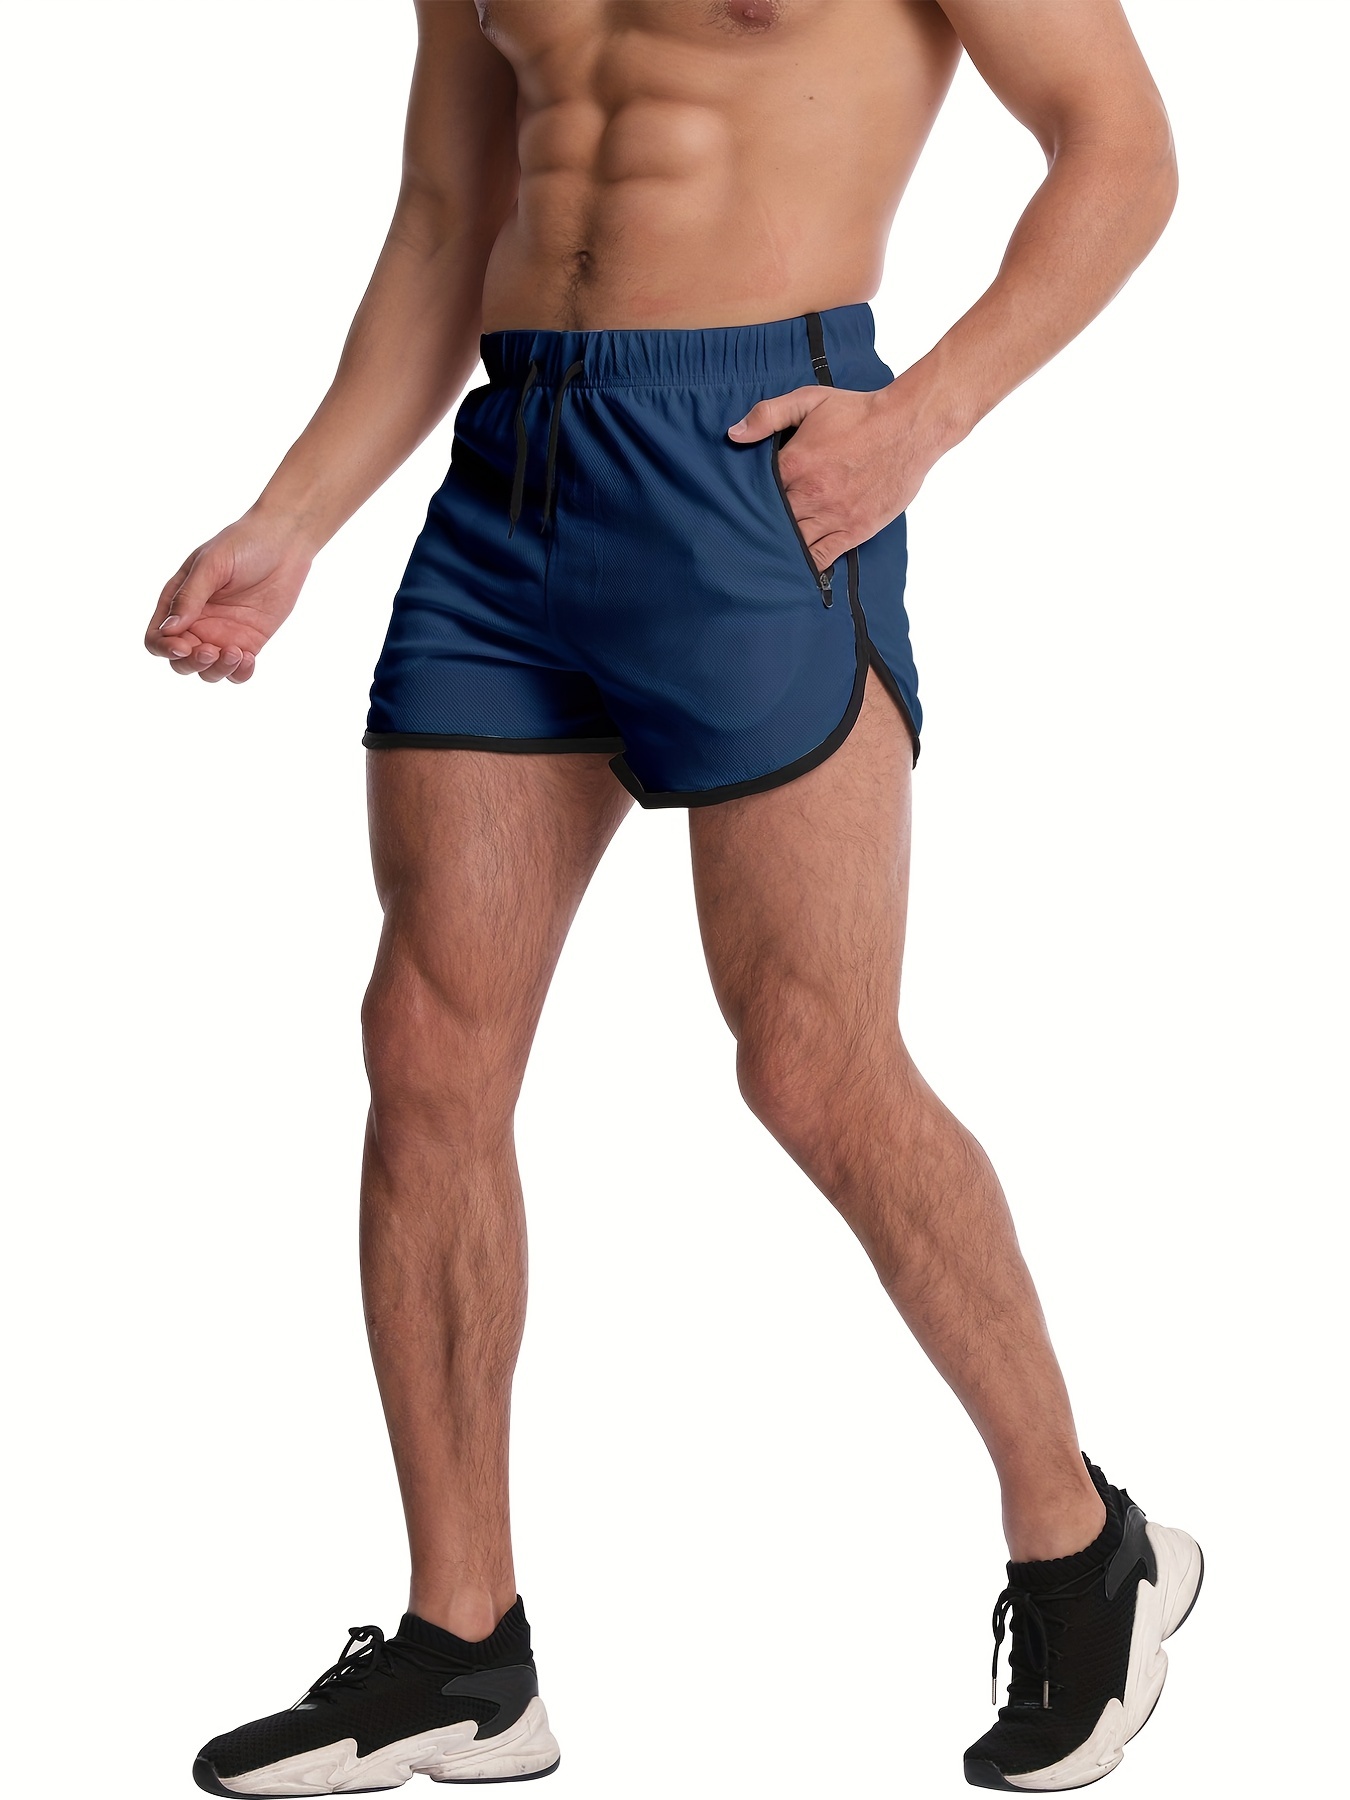 Coos Bay Athletic Running Fitness Exercise Shorts 7 Inseam Shorts